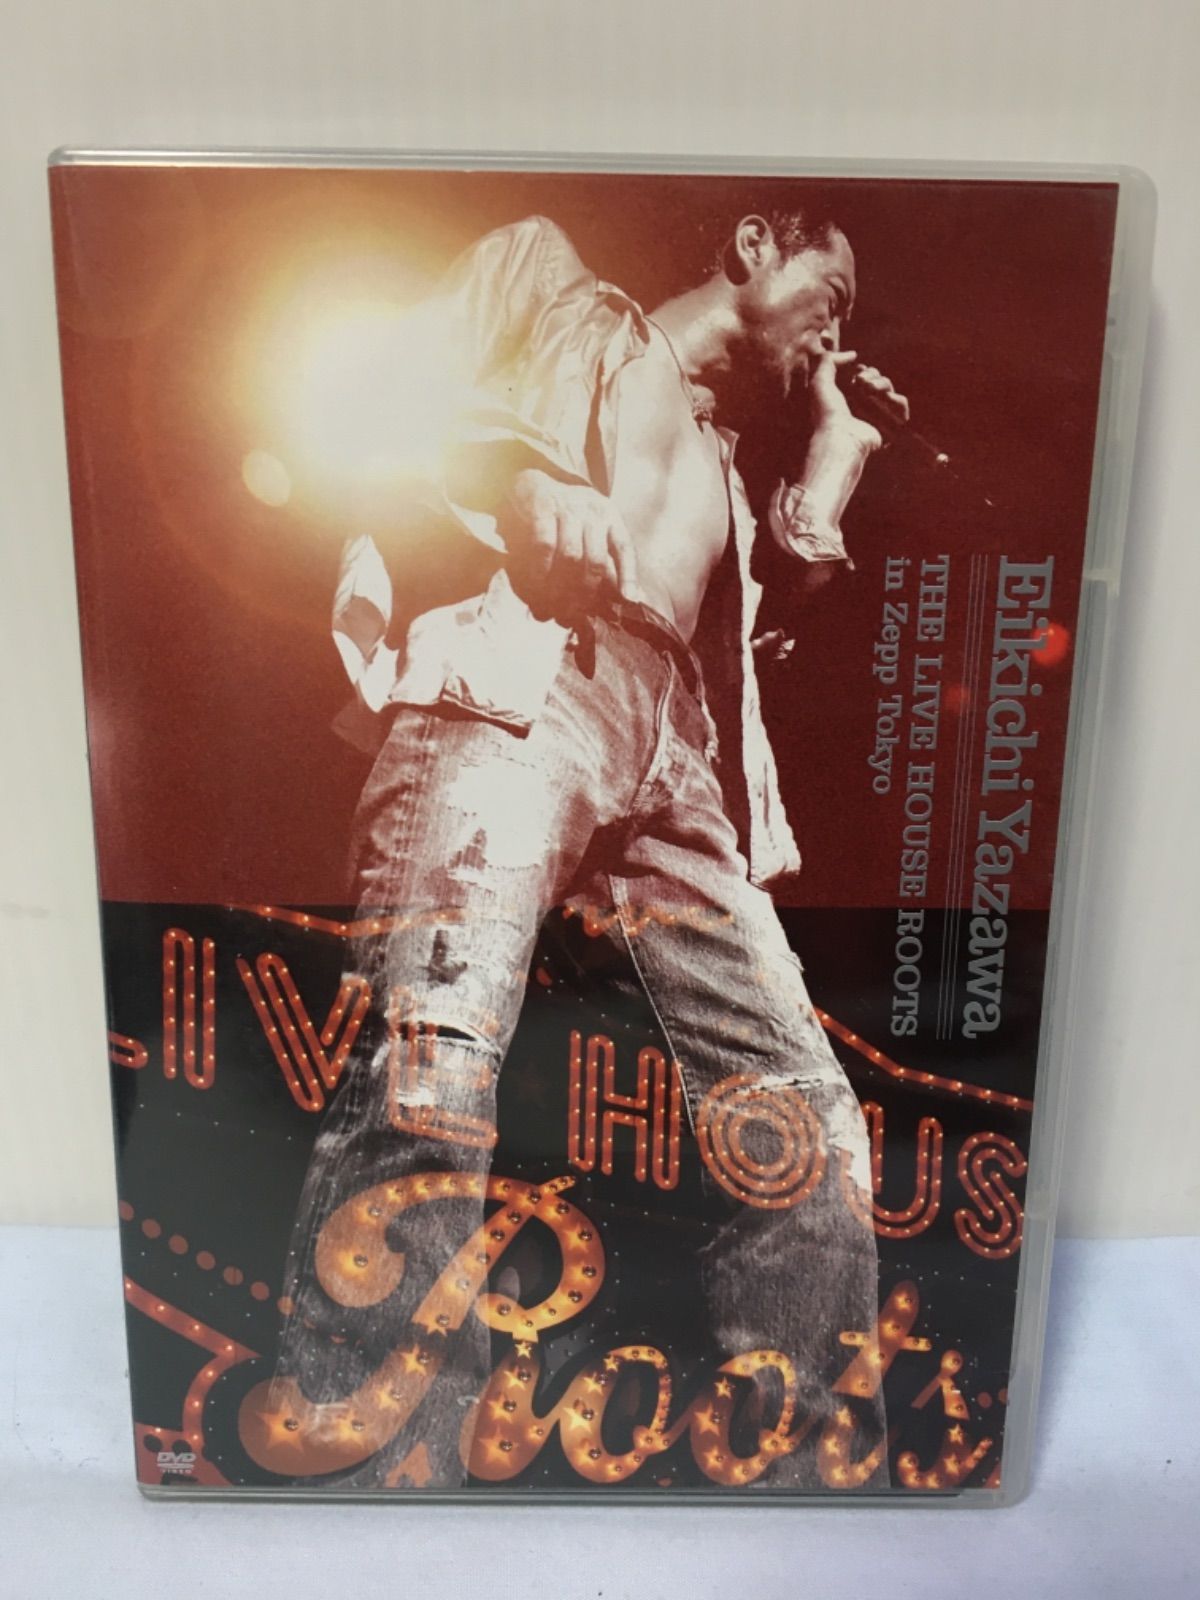 DVD 矢沢永吉 THE LIVE HOUSE ROOTS in Zepp Tokyo - メルカリ